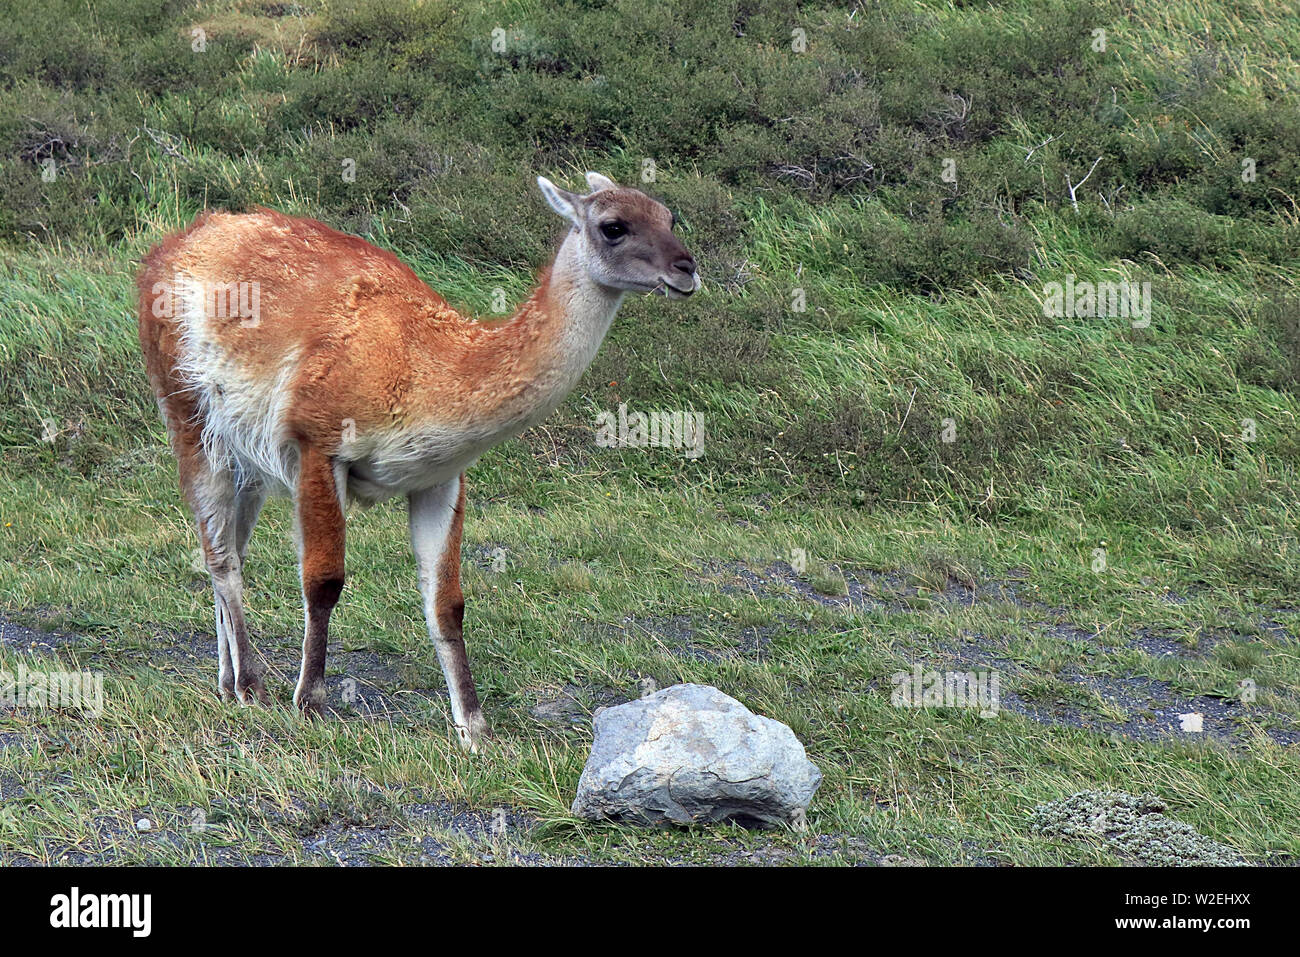 Wild Guanaco (Lama guanicoe) in the desolate grasslands of the Torres del Paine National Park in Southern Chile Stock Photo